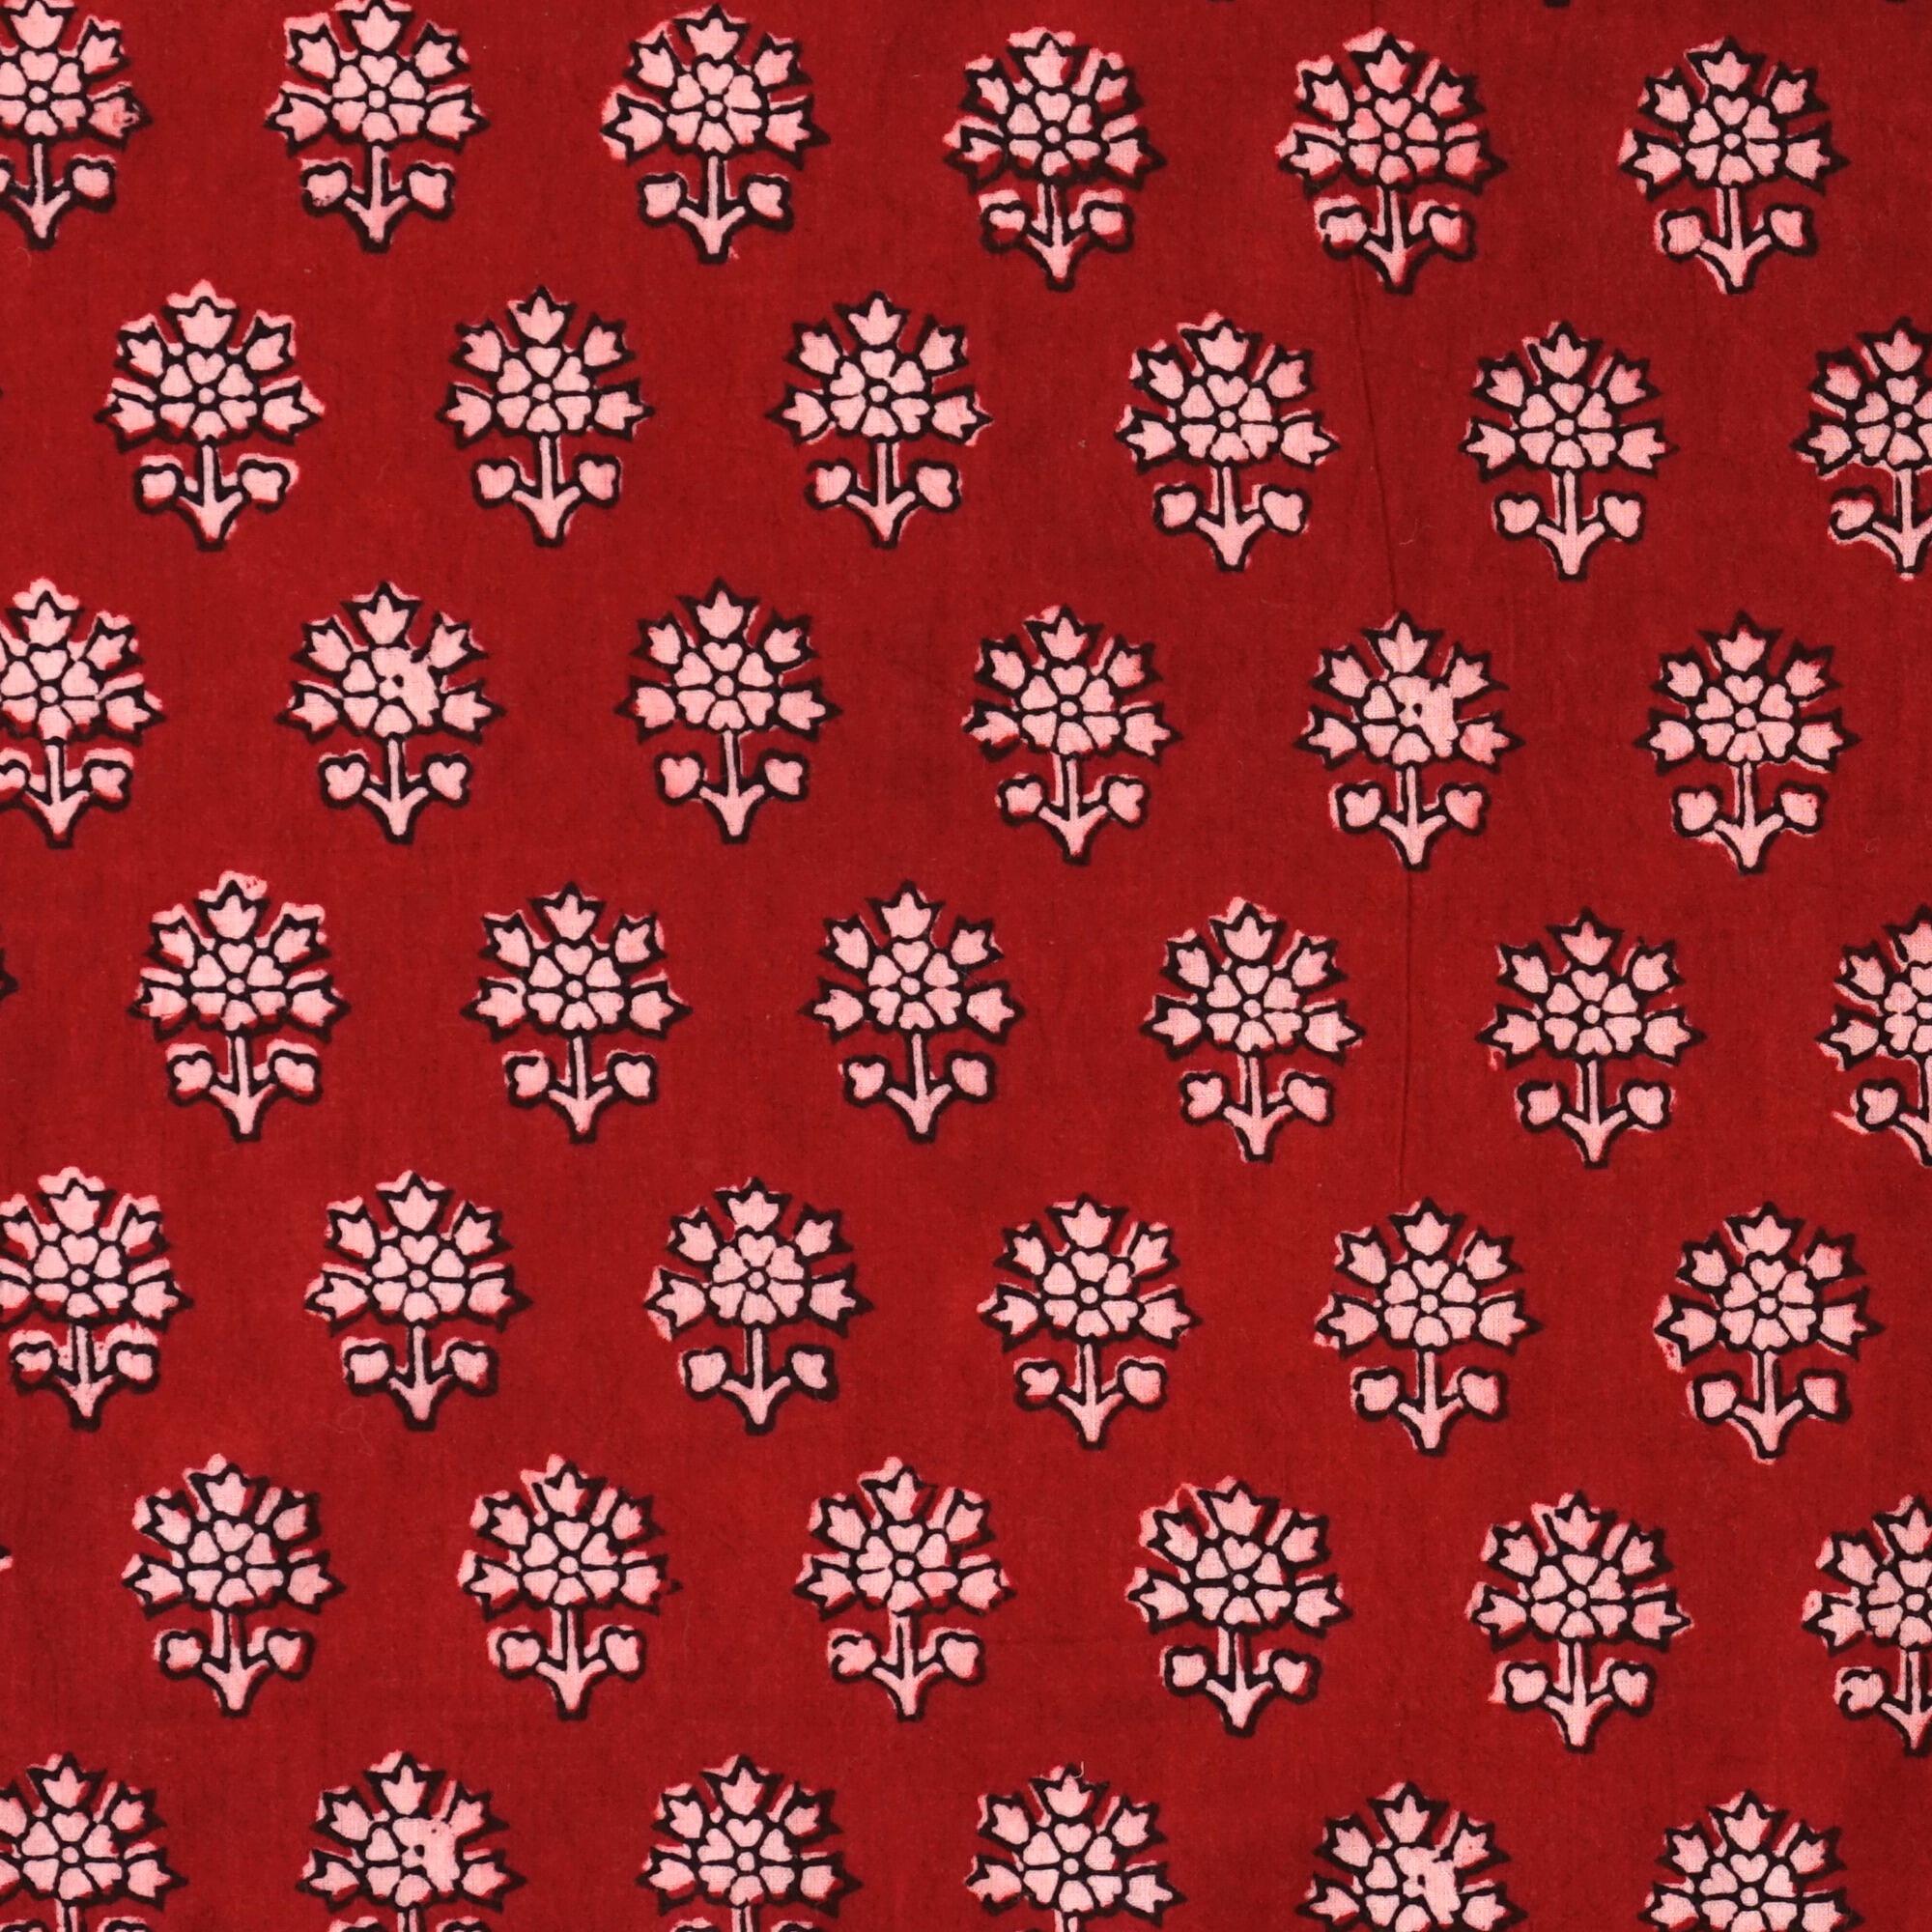 2 - ISK10 - 100% Block-Printed Cotton Fabric From India - New Perspective Design - Iron Rust Black & Alizarin Red Dyes - Flat